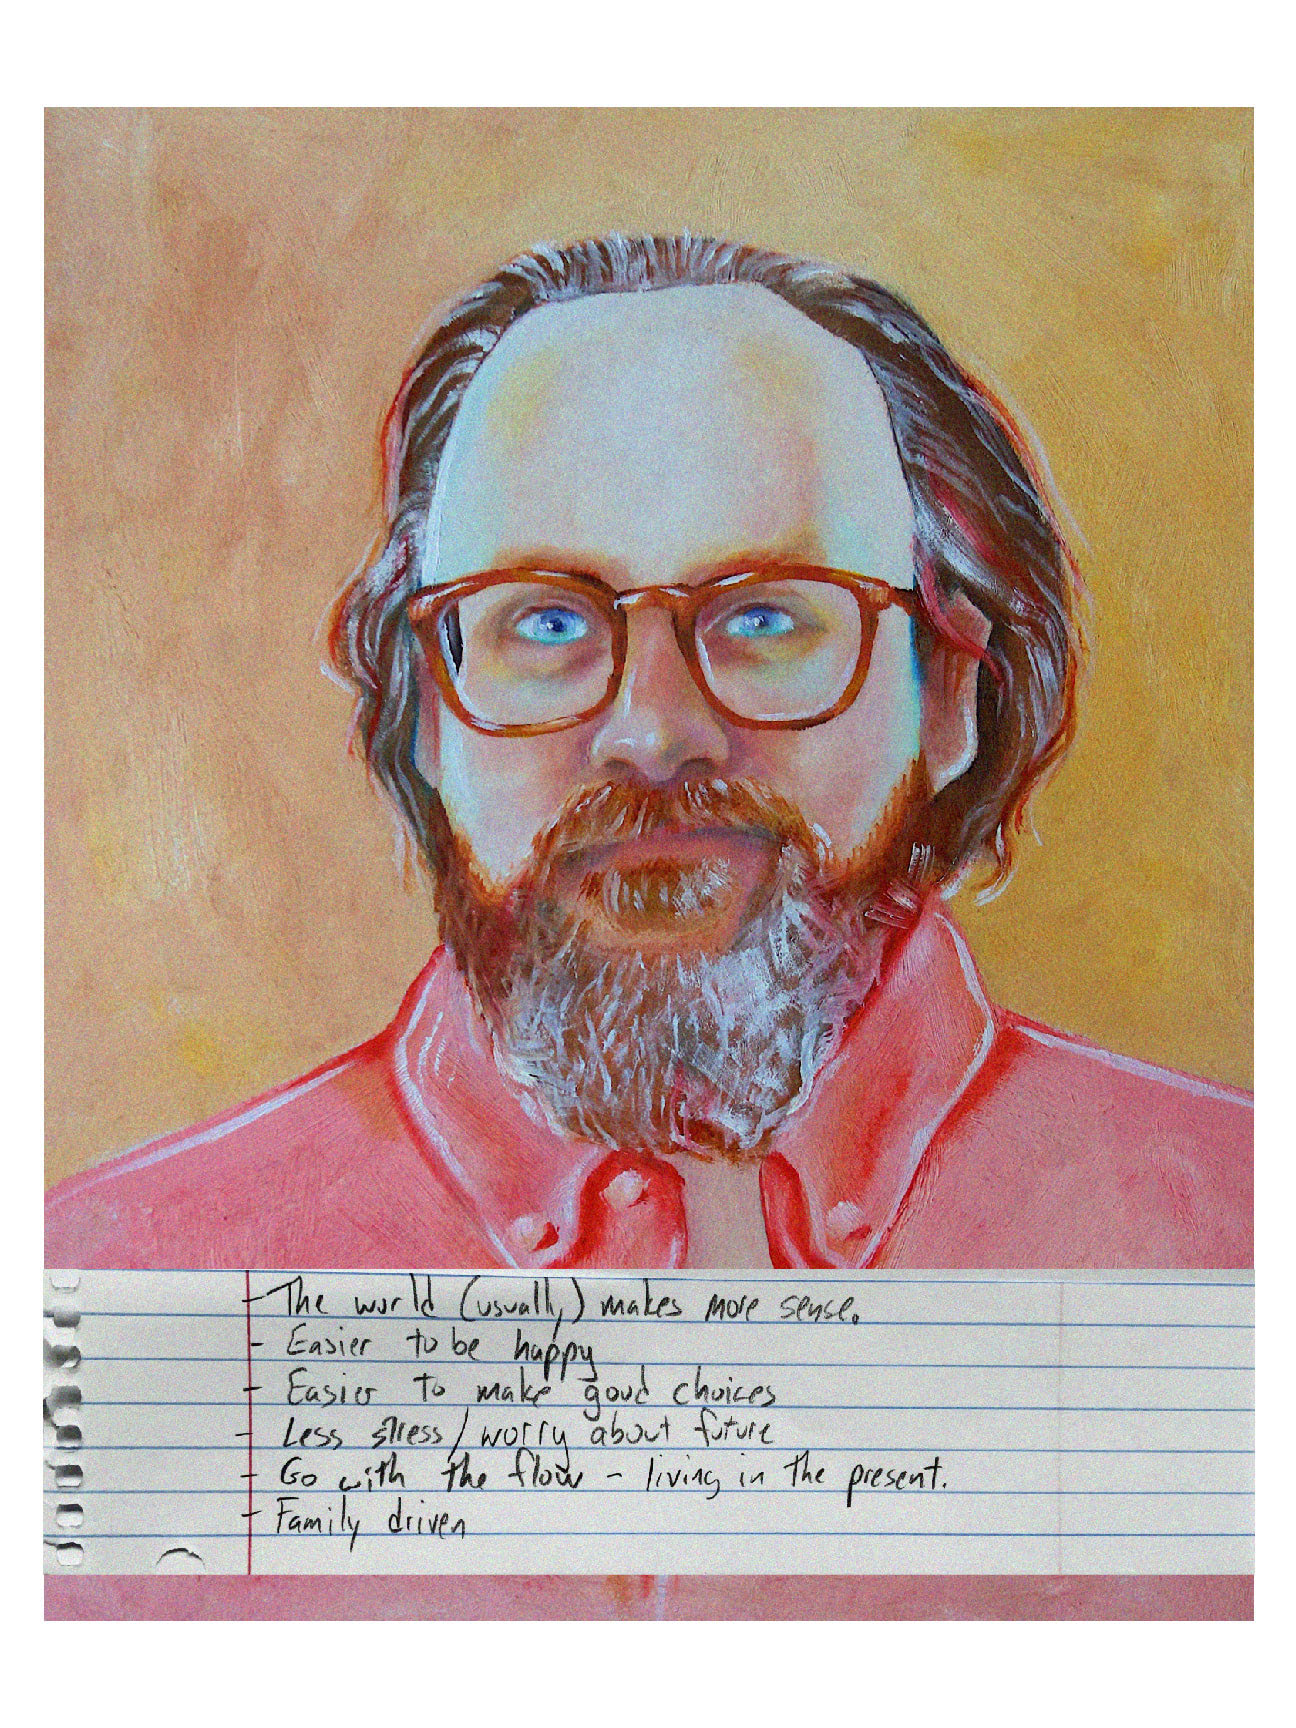 A painting of my dad, a man with a red beard and glasses, looking peacefully at the viewer.